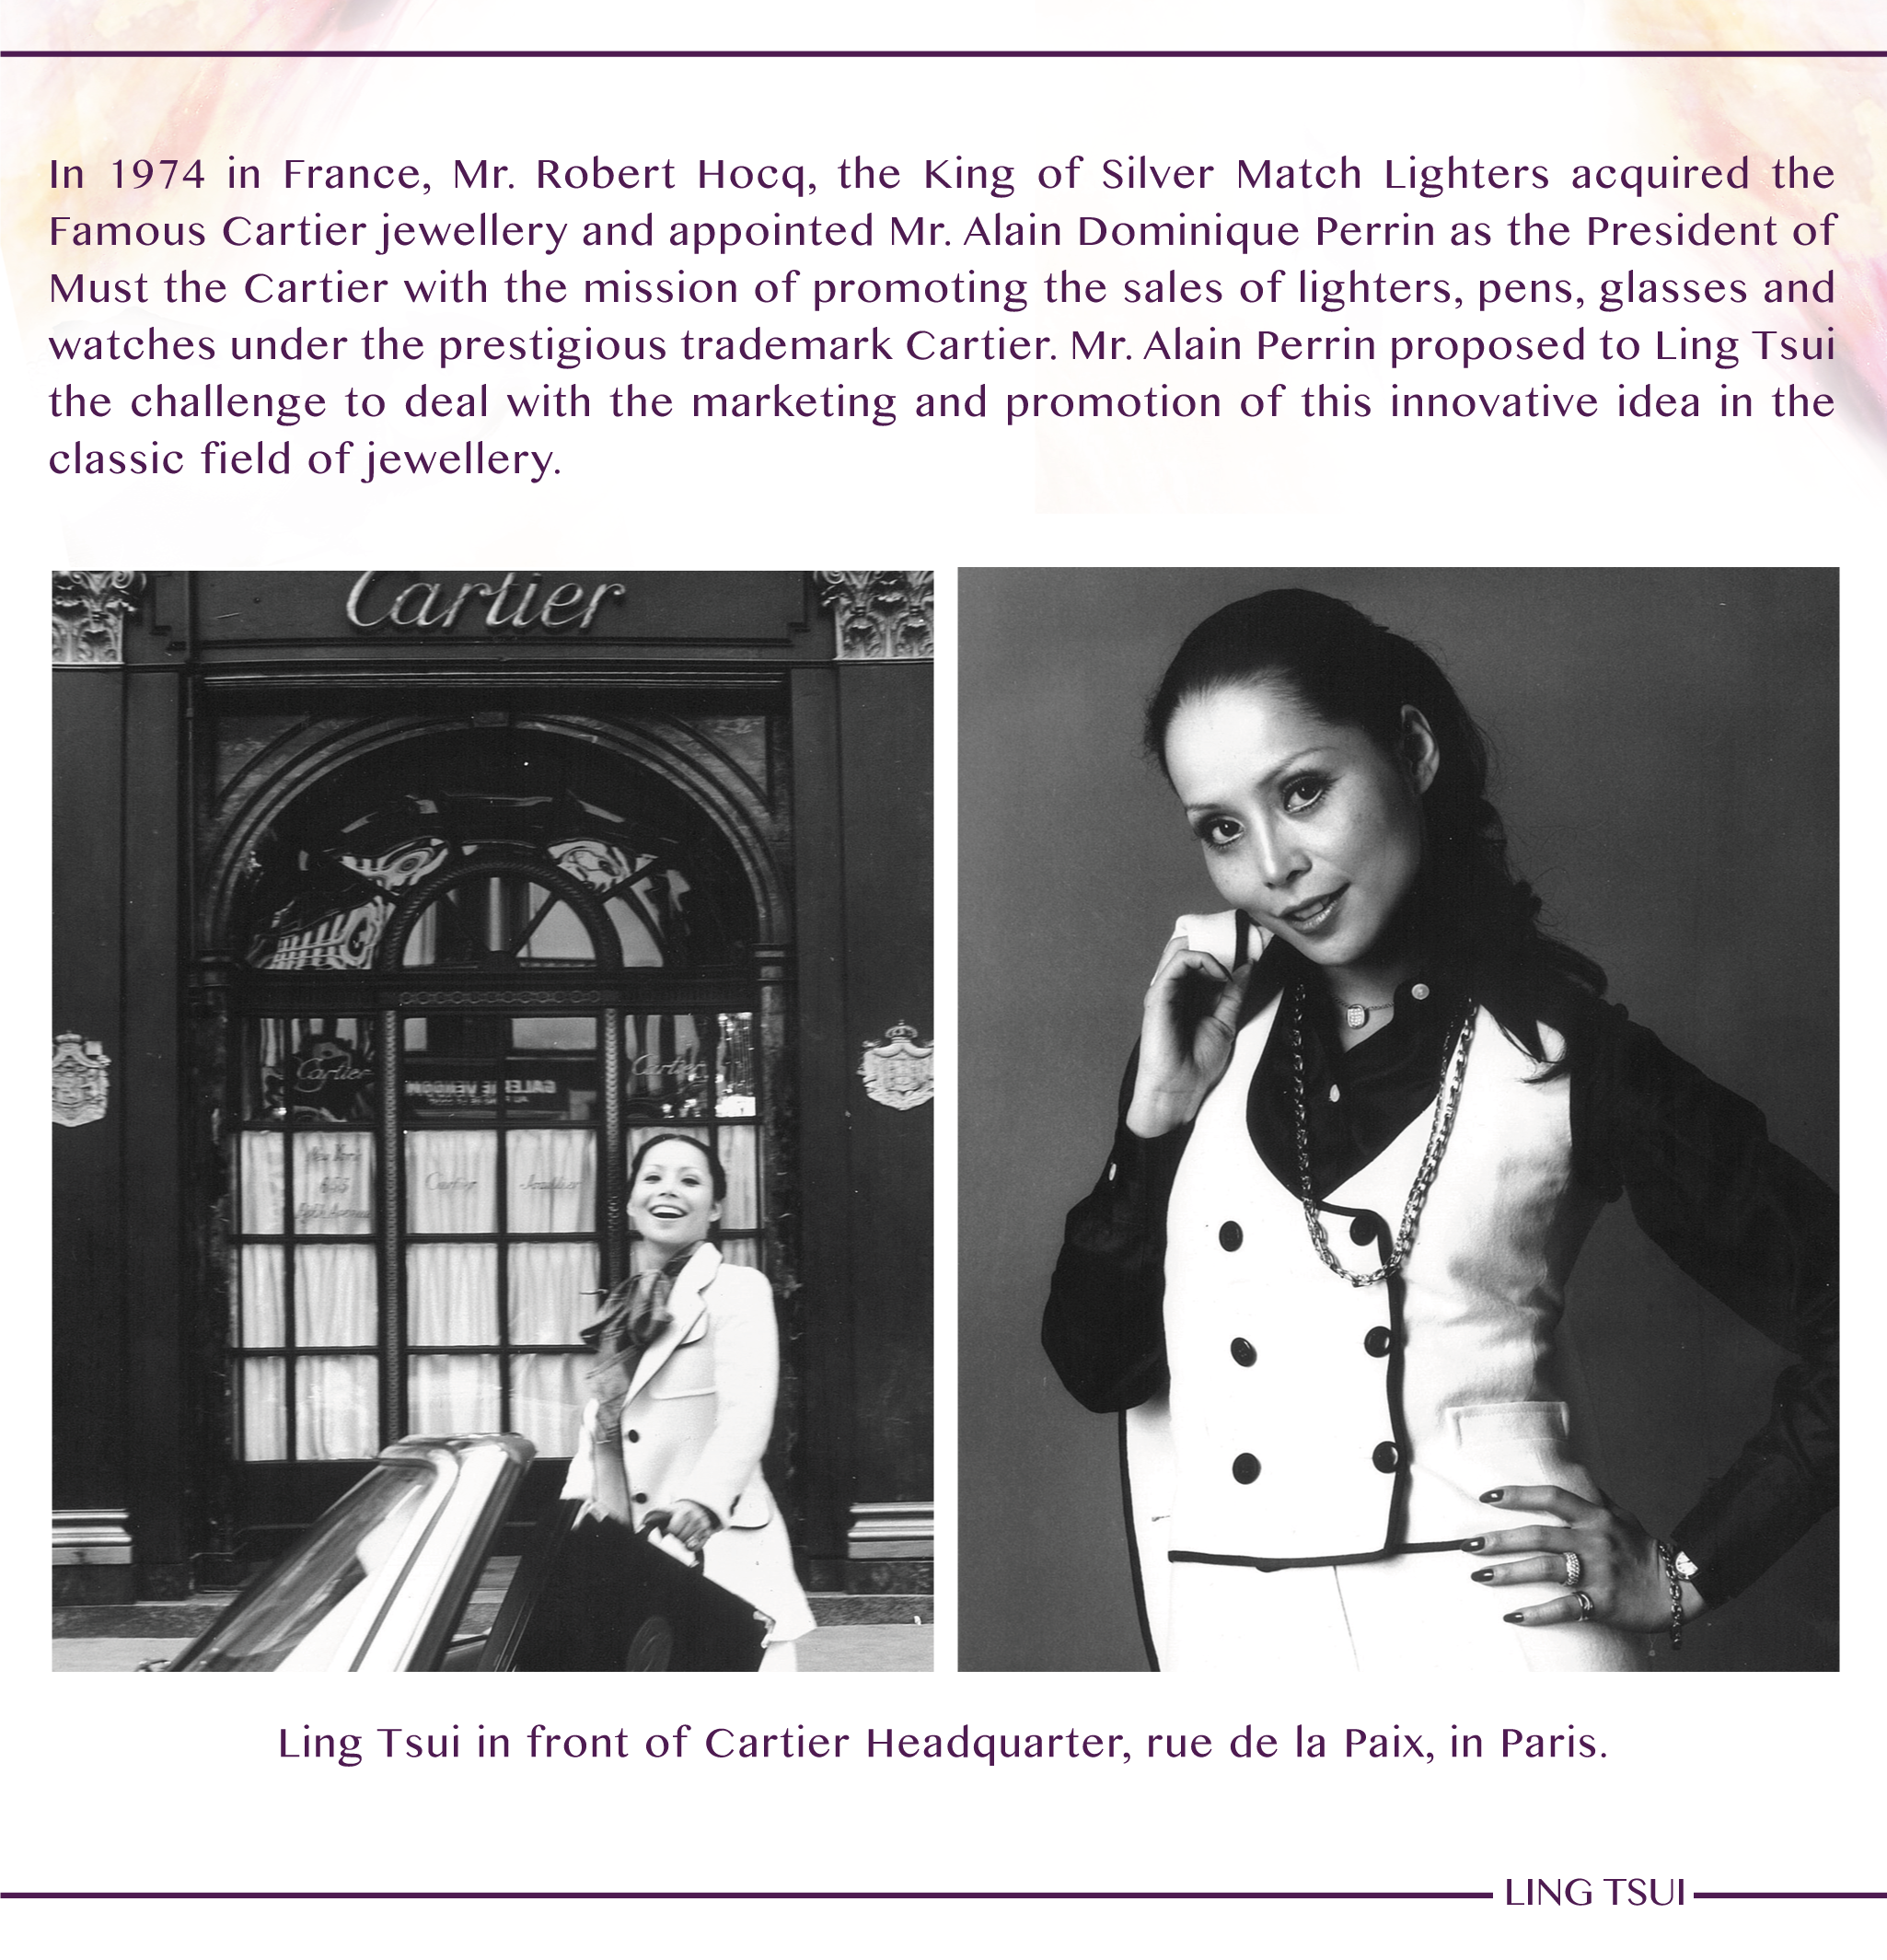 Ling Tsui became the first Chinese Lady to represent Cartier in Asia.